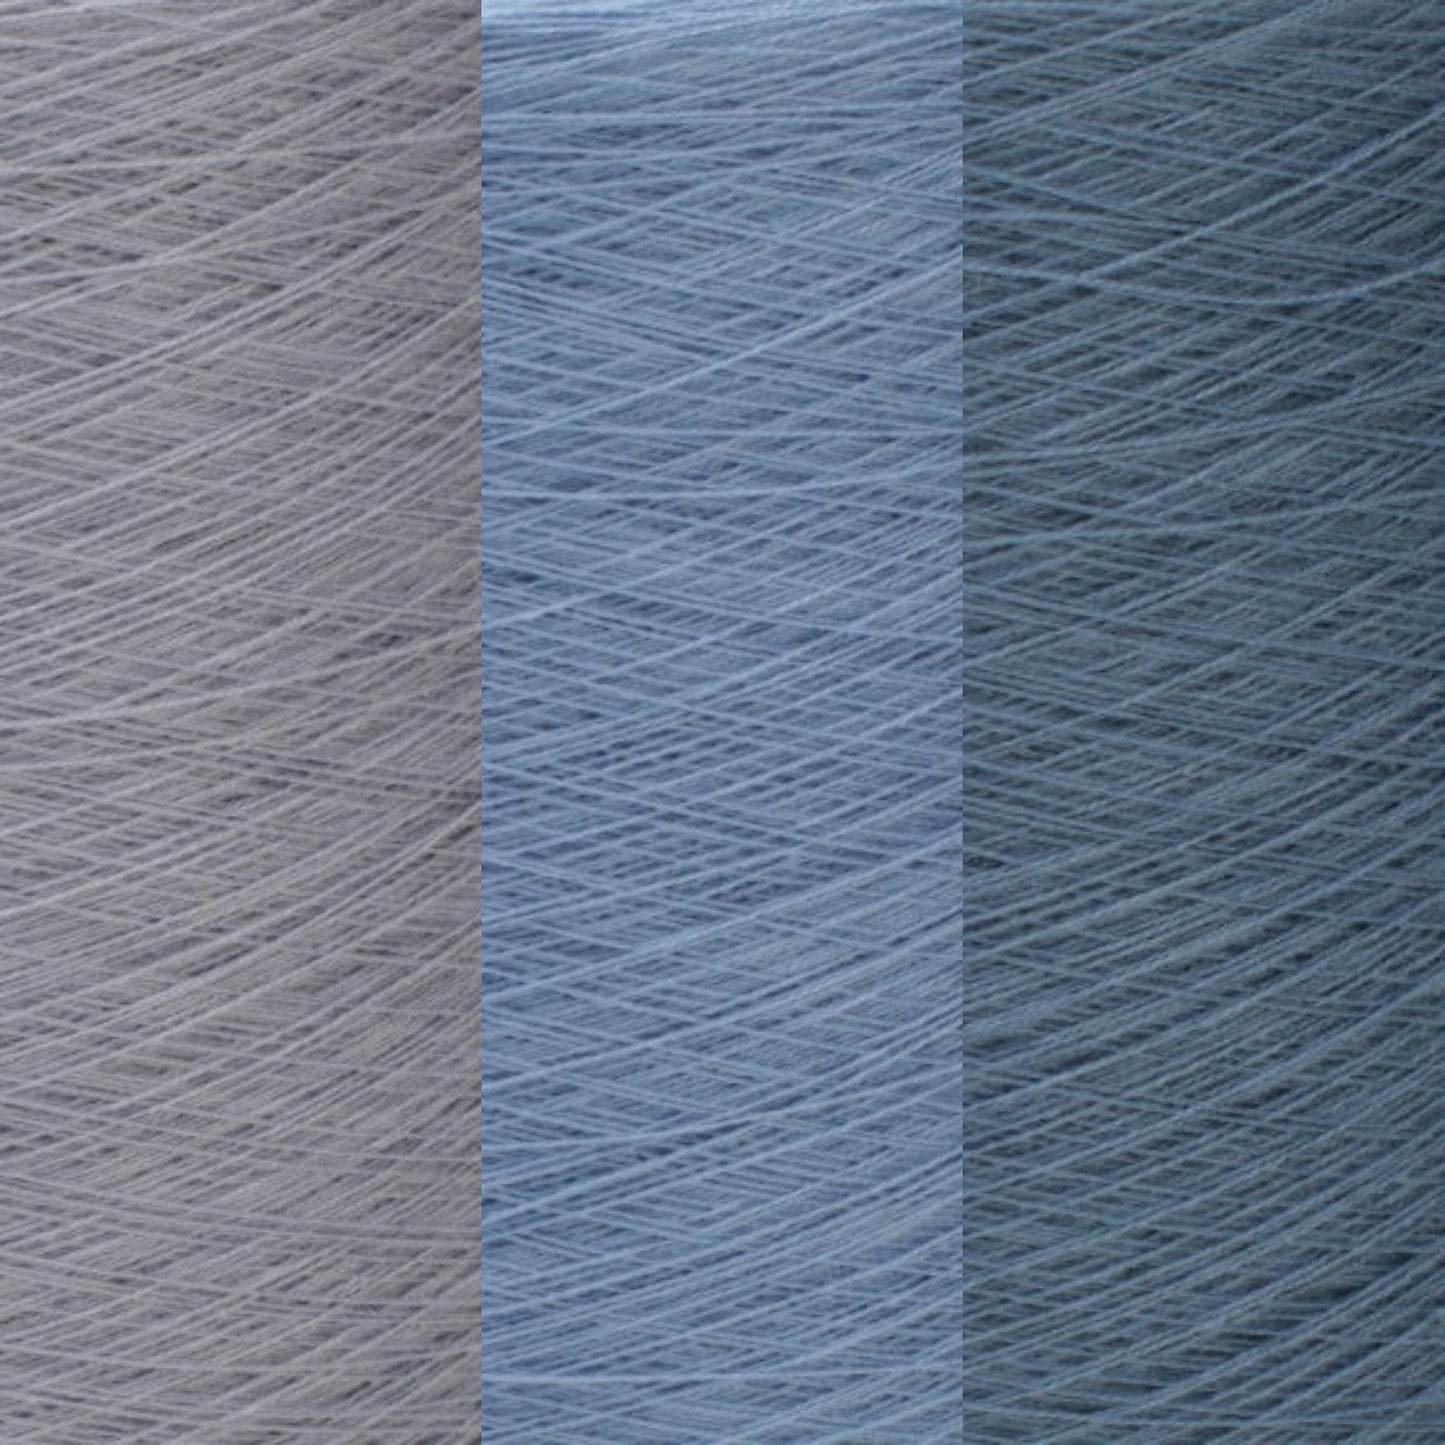 C326 cotton/acrylic ombre yarn cake, normal style, 140g, about 700m, 3ply